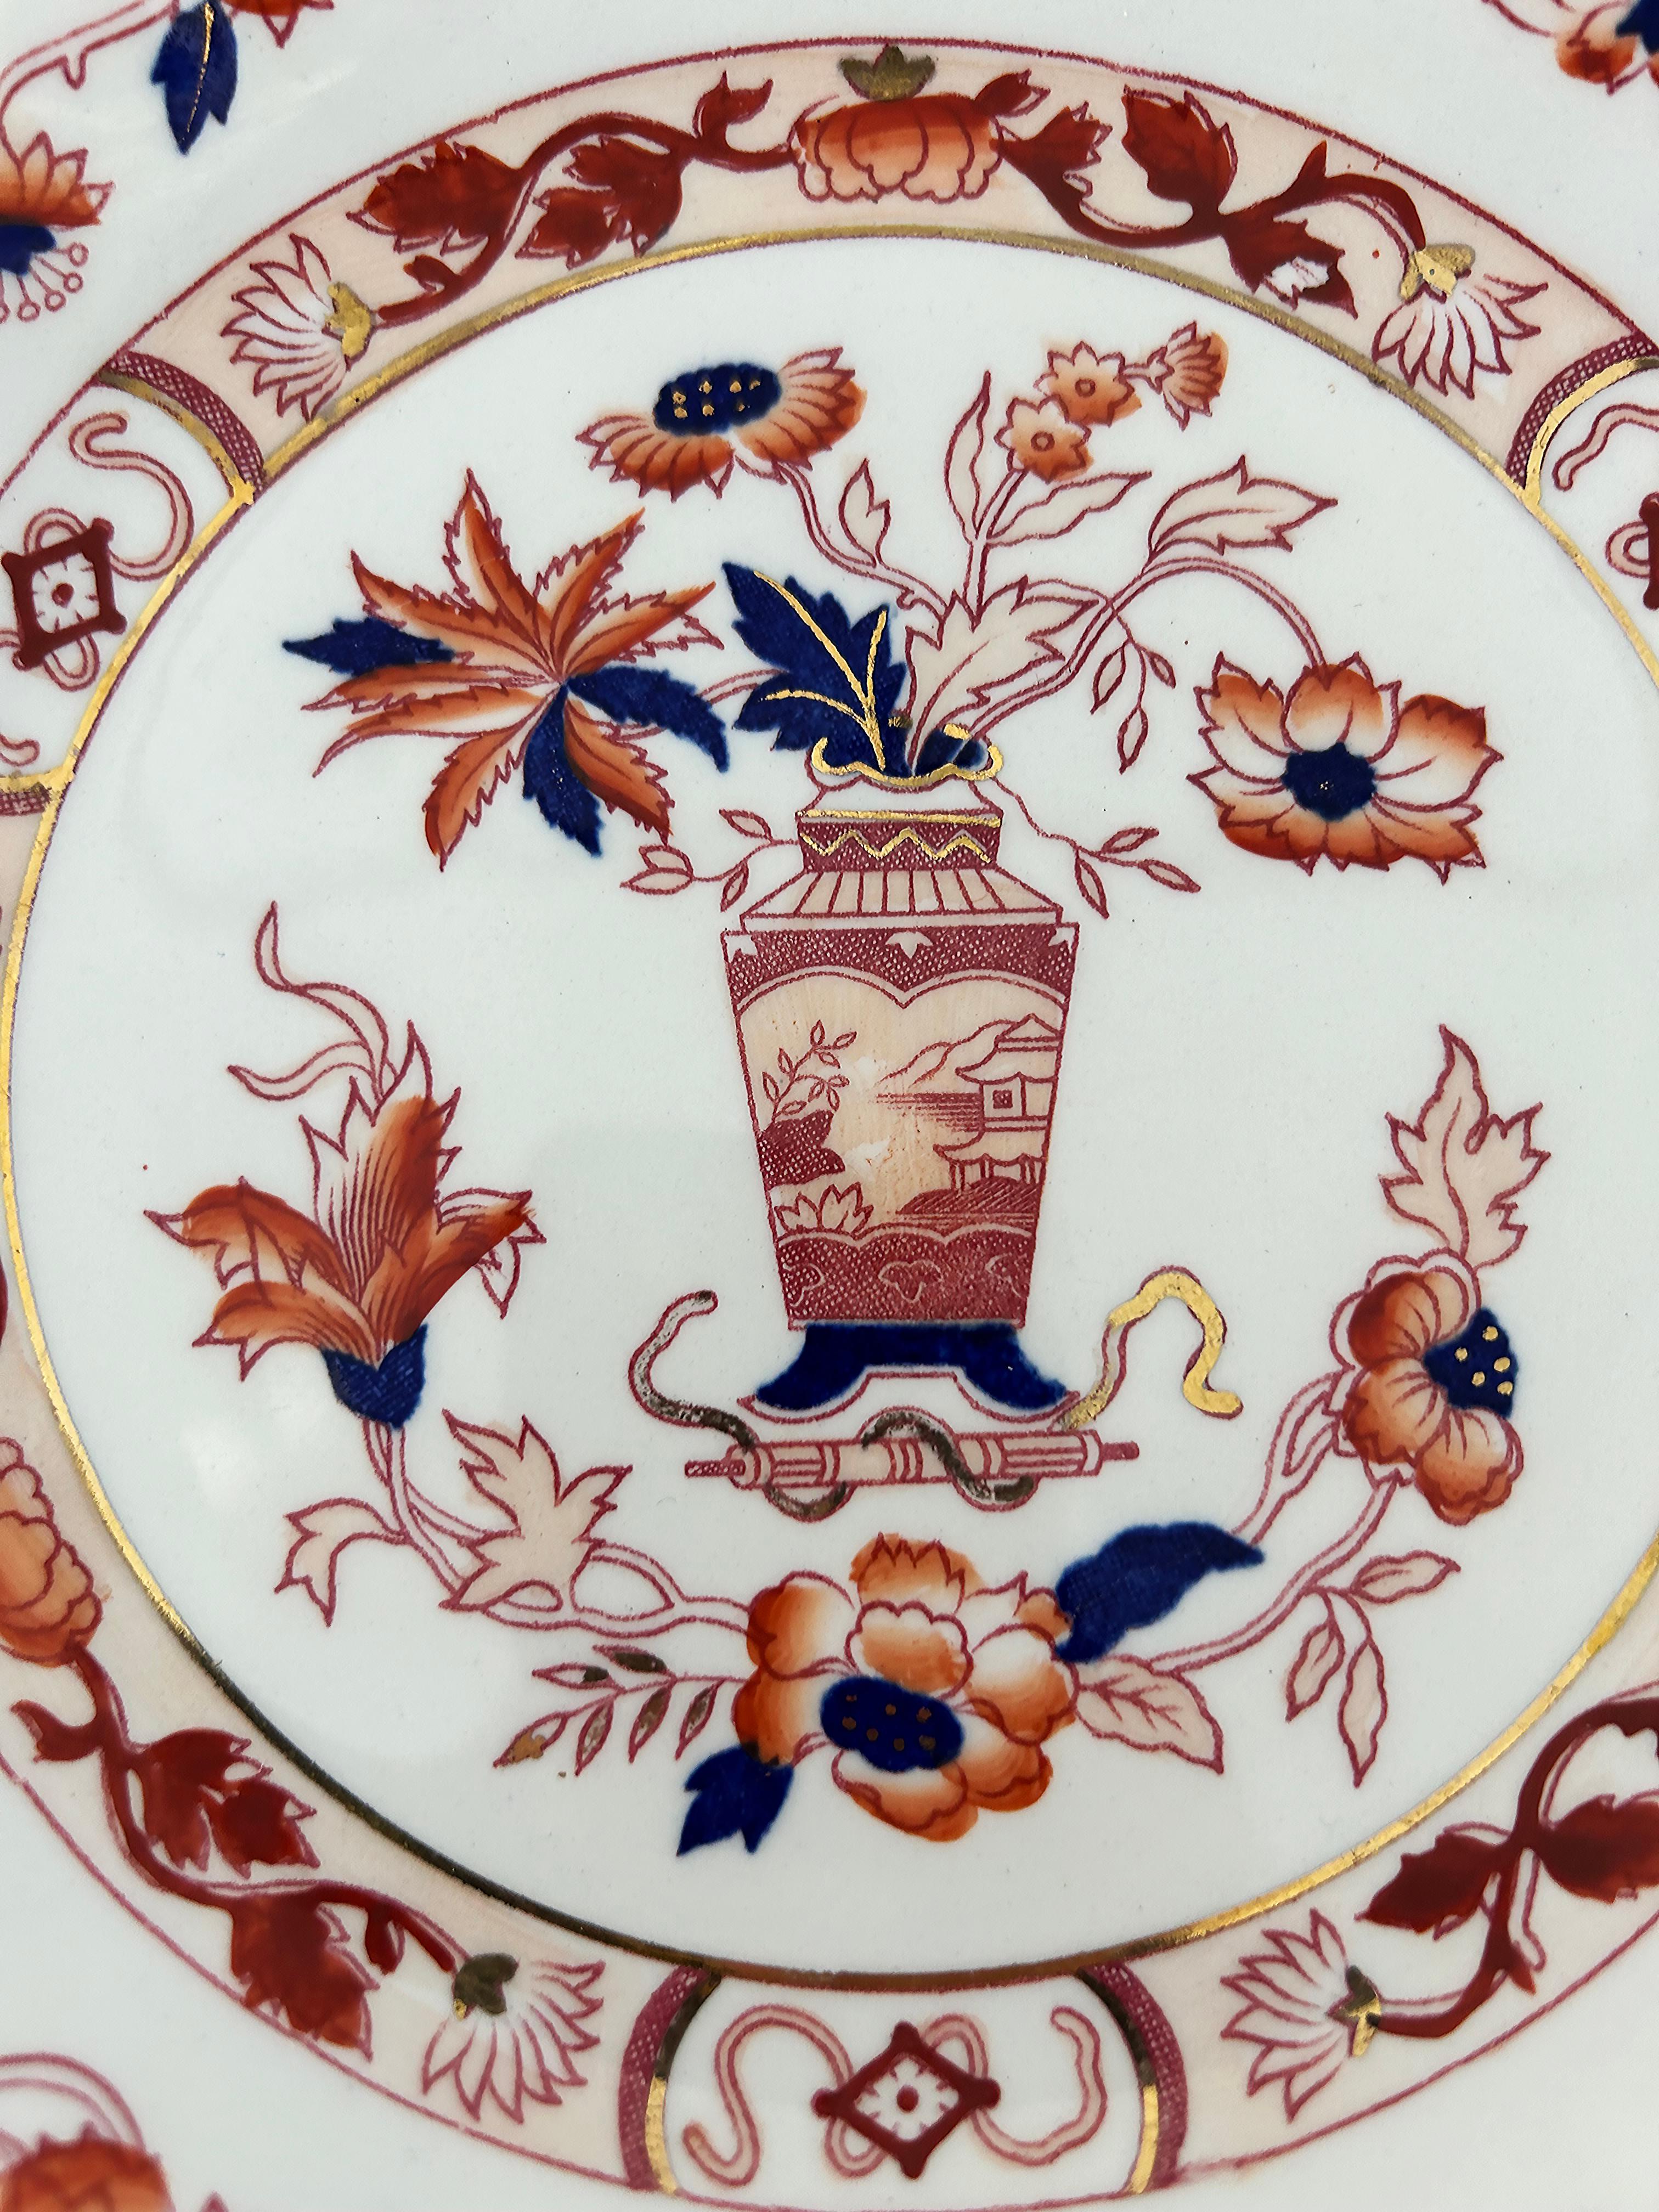 Chinoiserie Red, Blue and Gilt Decorated Porcelain Plate, Illegibly Marked

Offered for sale is a Chinoiserie style porcelain decorative red, blue, and gilt decorated porcelain plate. This plate is great to serve on or to hang on a wall.